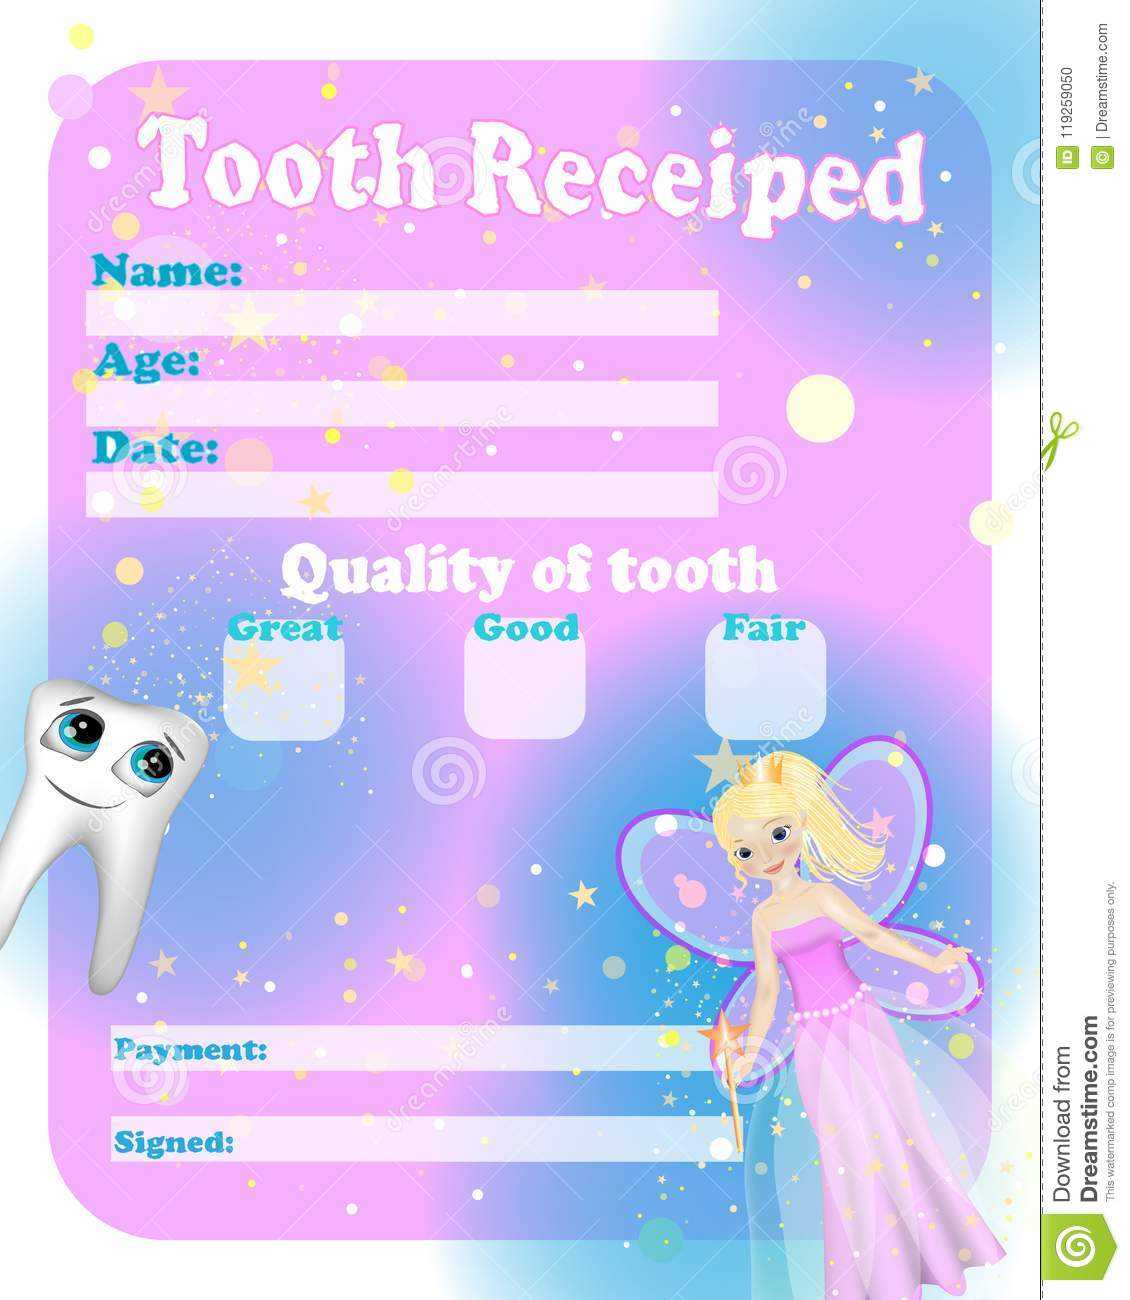 Certificate Tooth Fairy Stock Vector. Illustration Of Dental Regarding Free Tooth Fairy Certificate Template